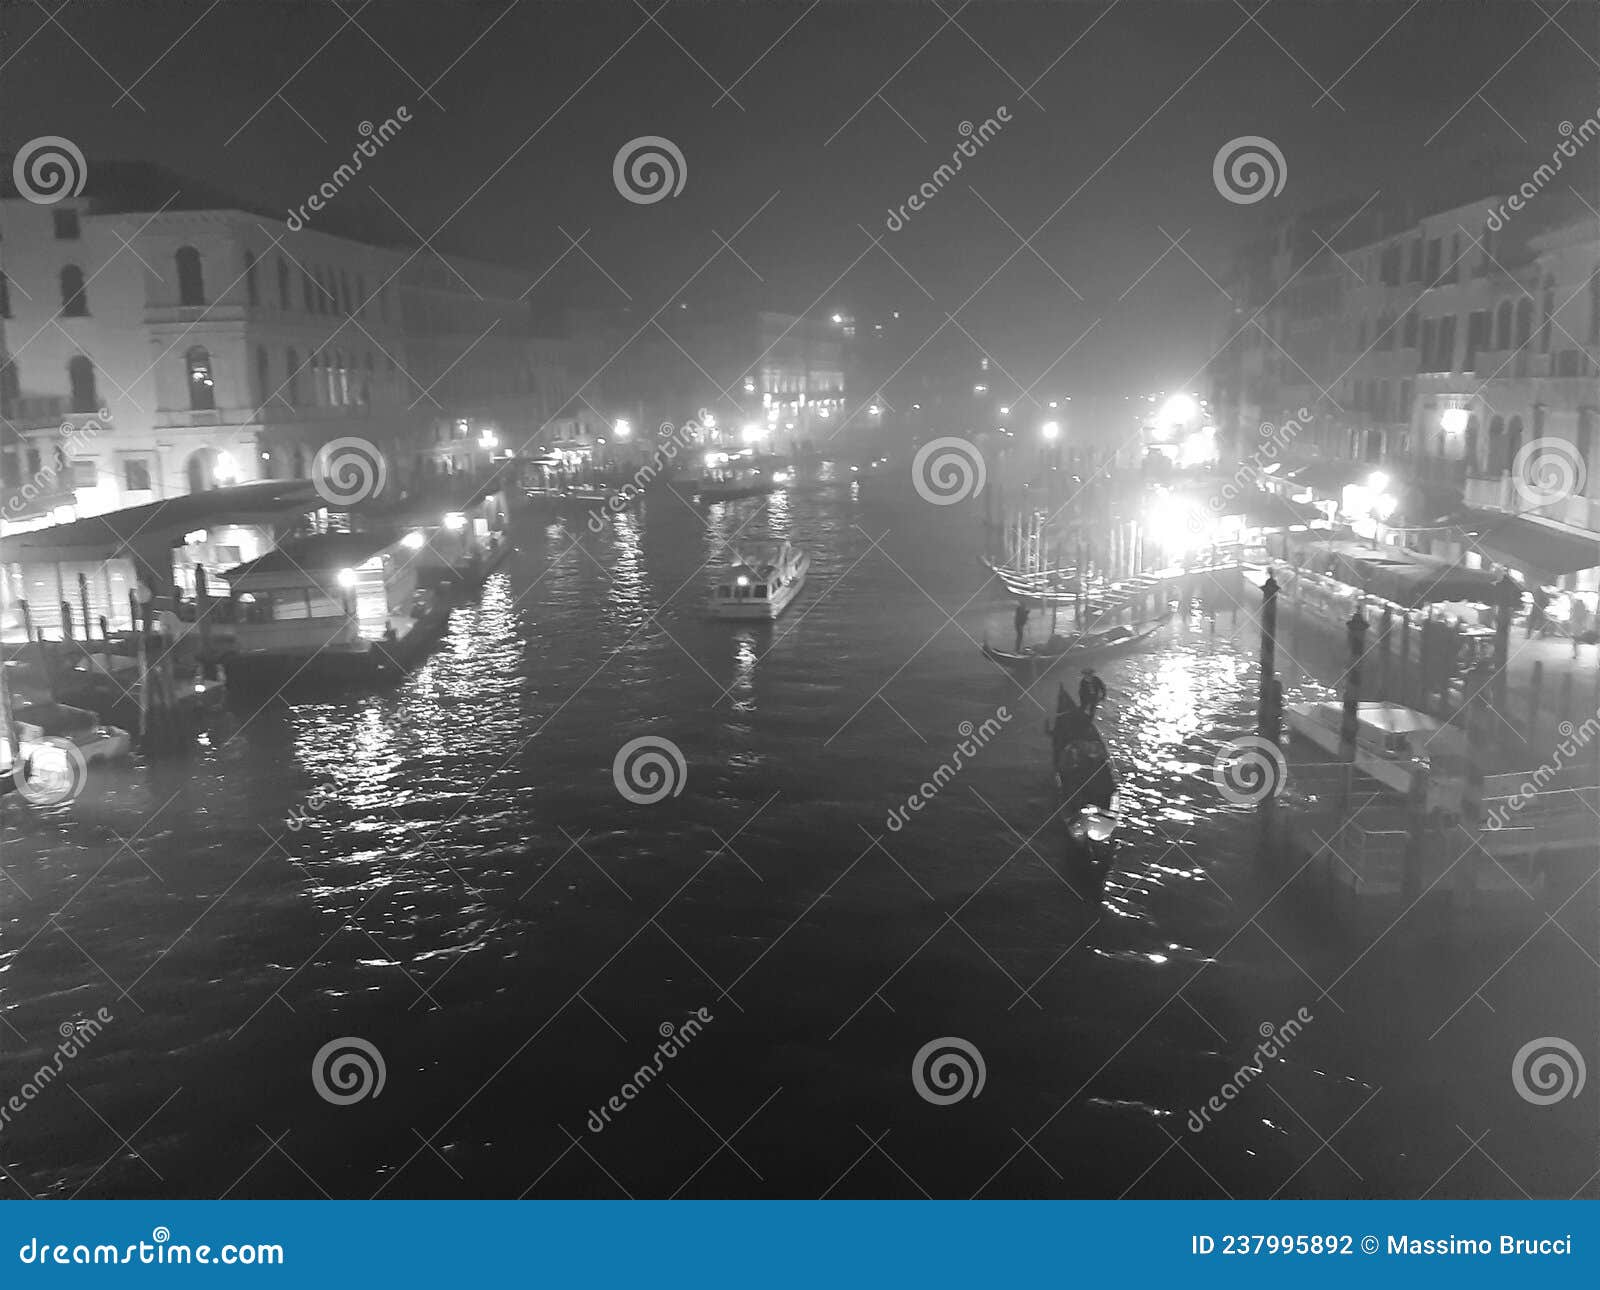 Venice, Italy, January 27, 2020 Grand Canal at night. Venice, Italy, January 27, 2020 evocative black and white image of the Grand Canal at night